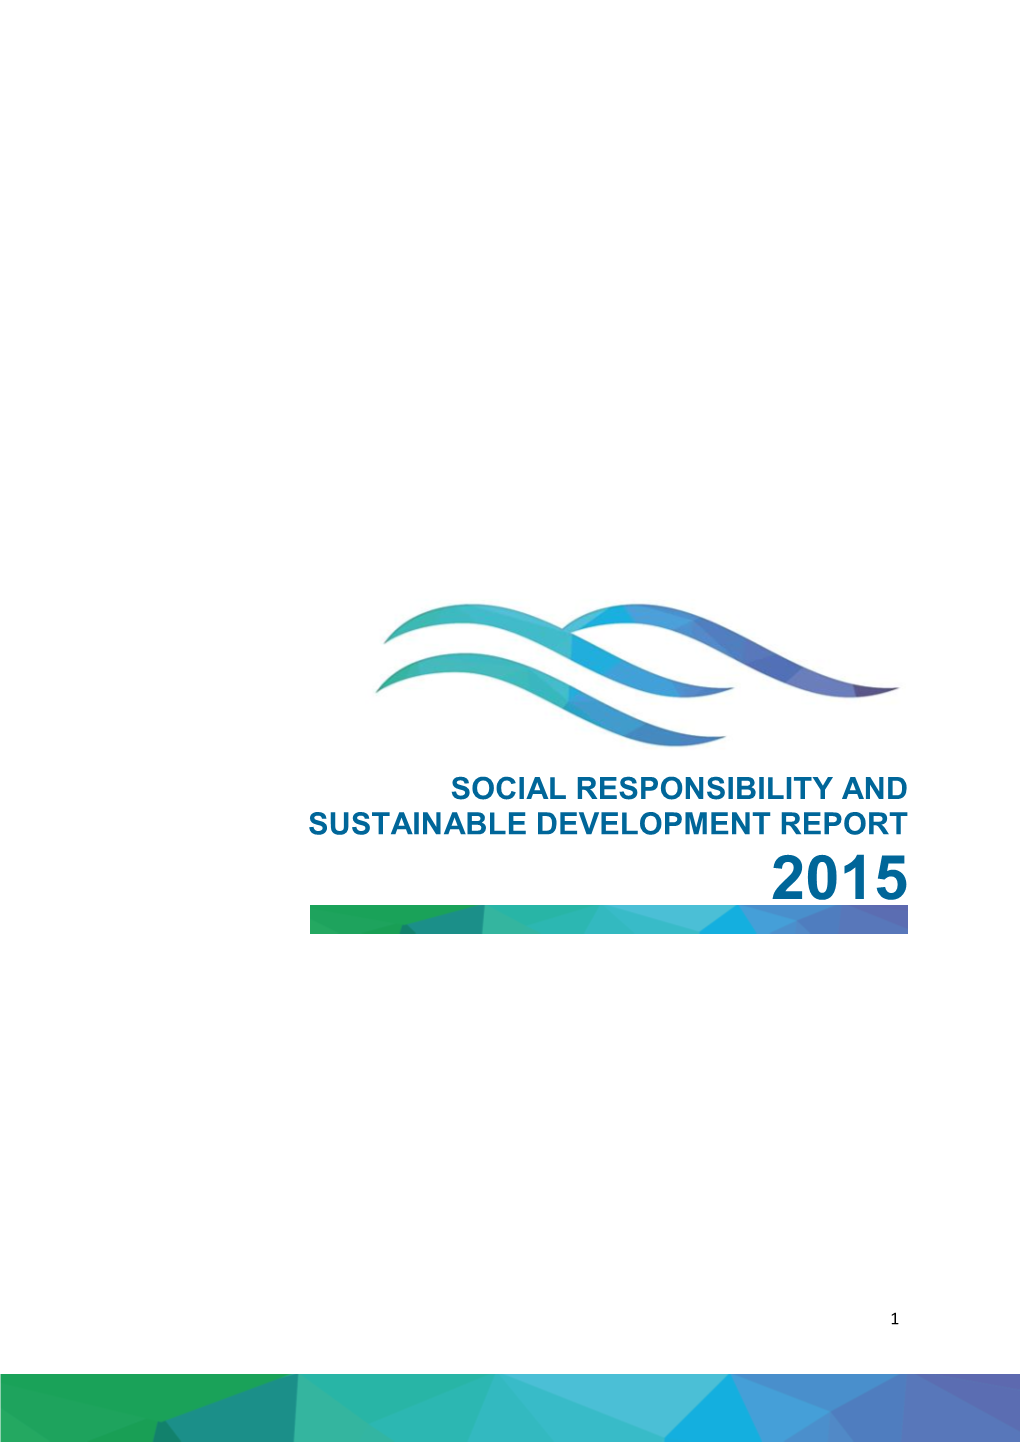 Social Responsibility and Sustainable Development Report 2015